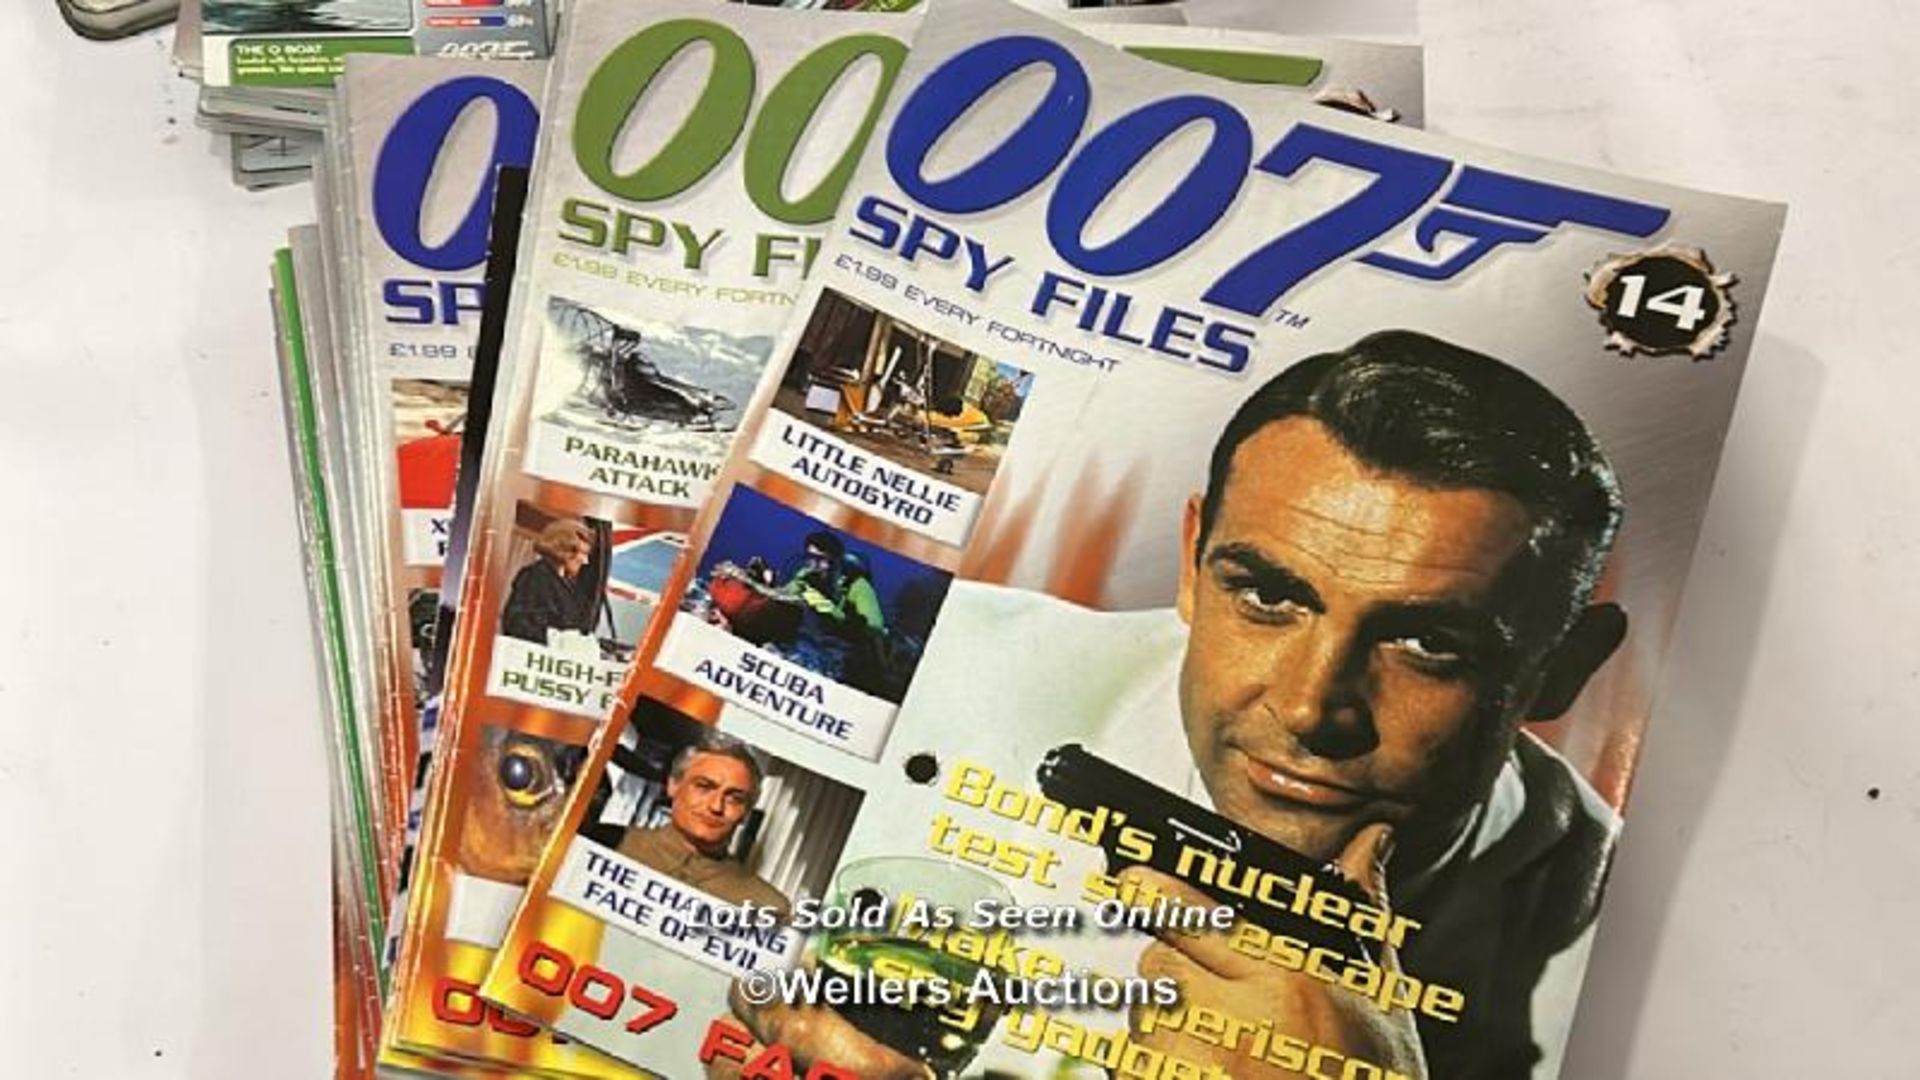 James Bond - Collectors cards, magazines, playing cards and sealed DVD box set / AN8 - Image 3 of 8